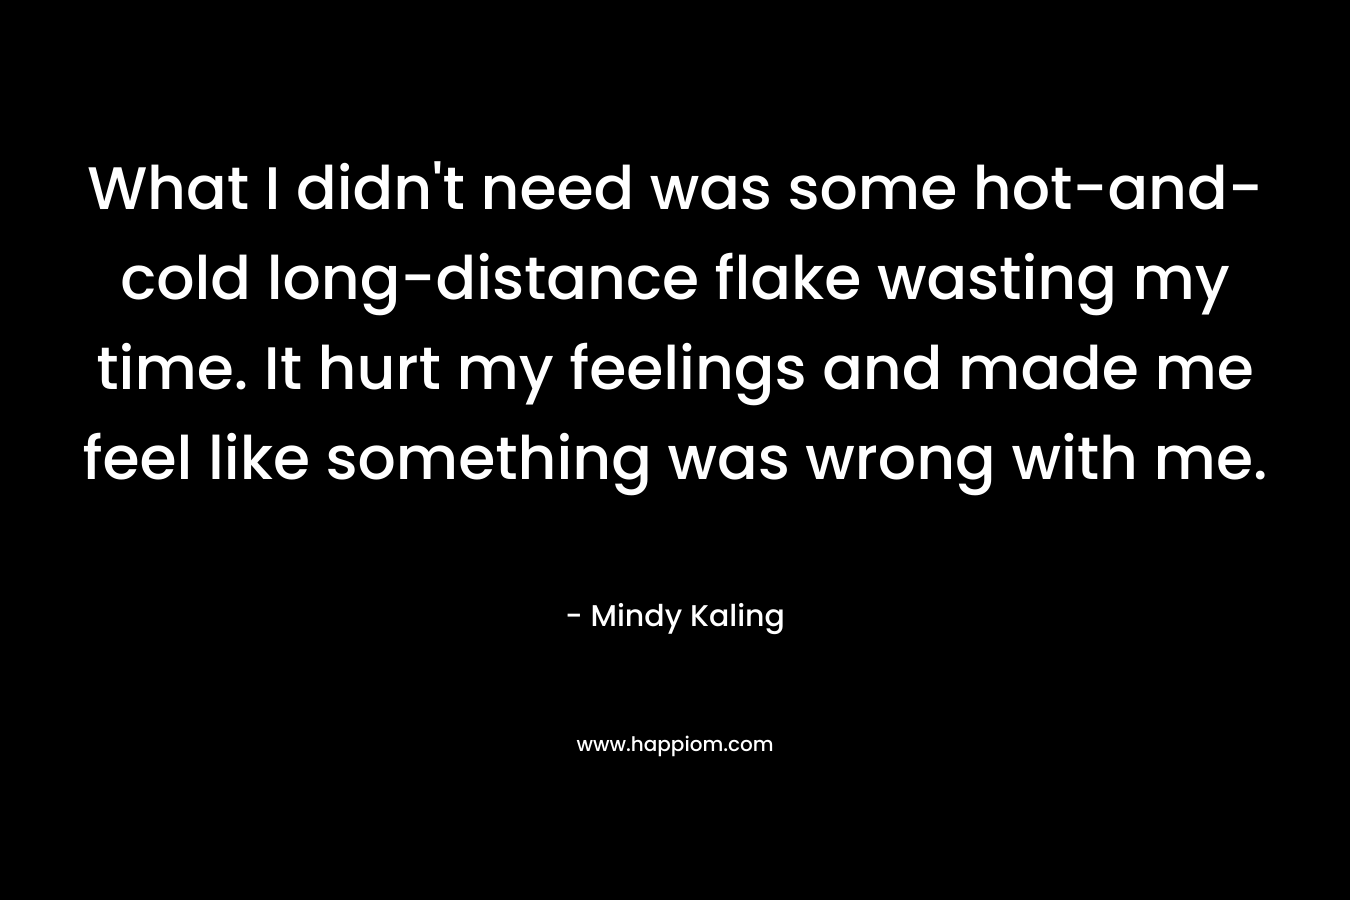 What I didn’t need was some hot-and-cold long-distance flake wasting my time. It hurt my feelings and made me feel like something was wrong with me. – Mindy Kaling